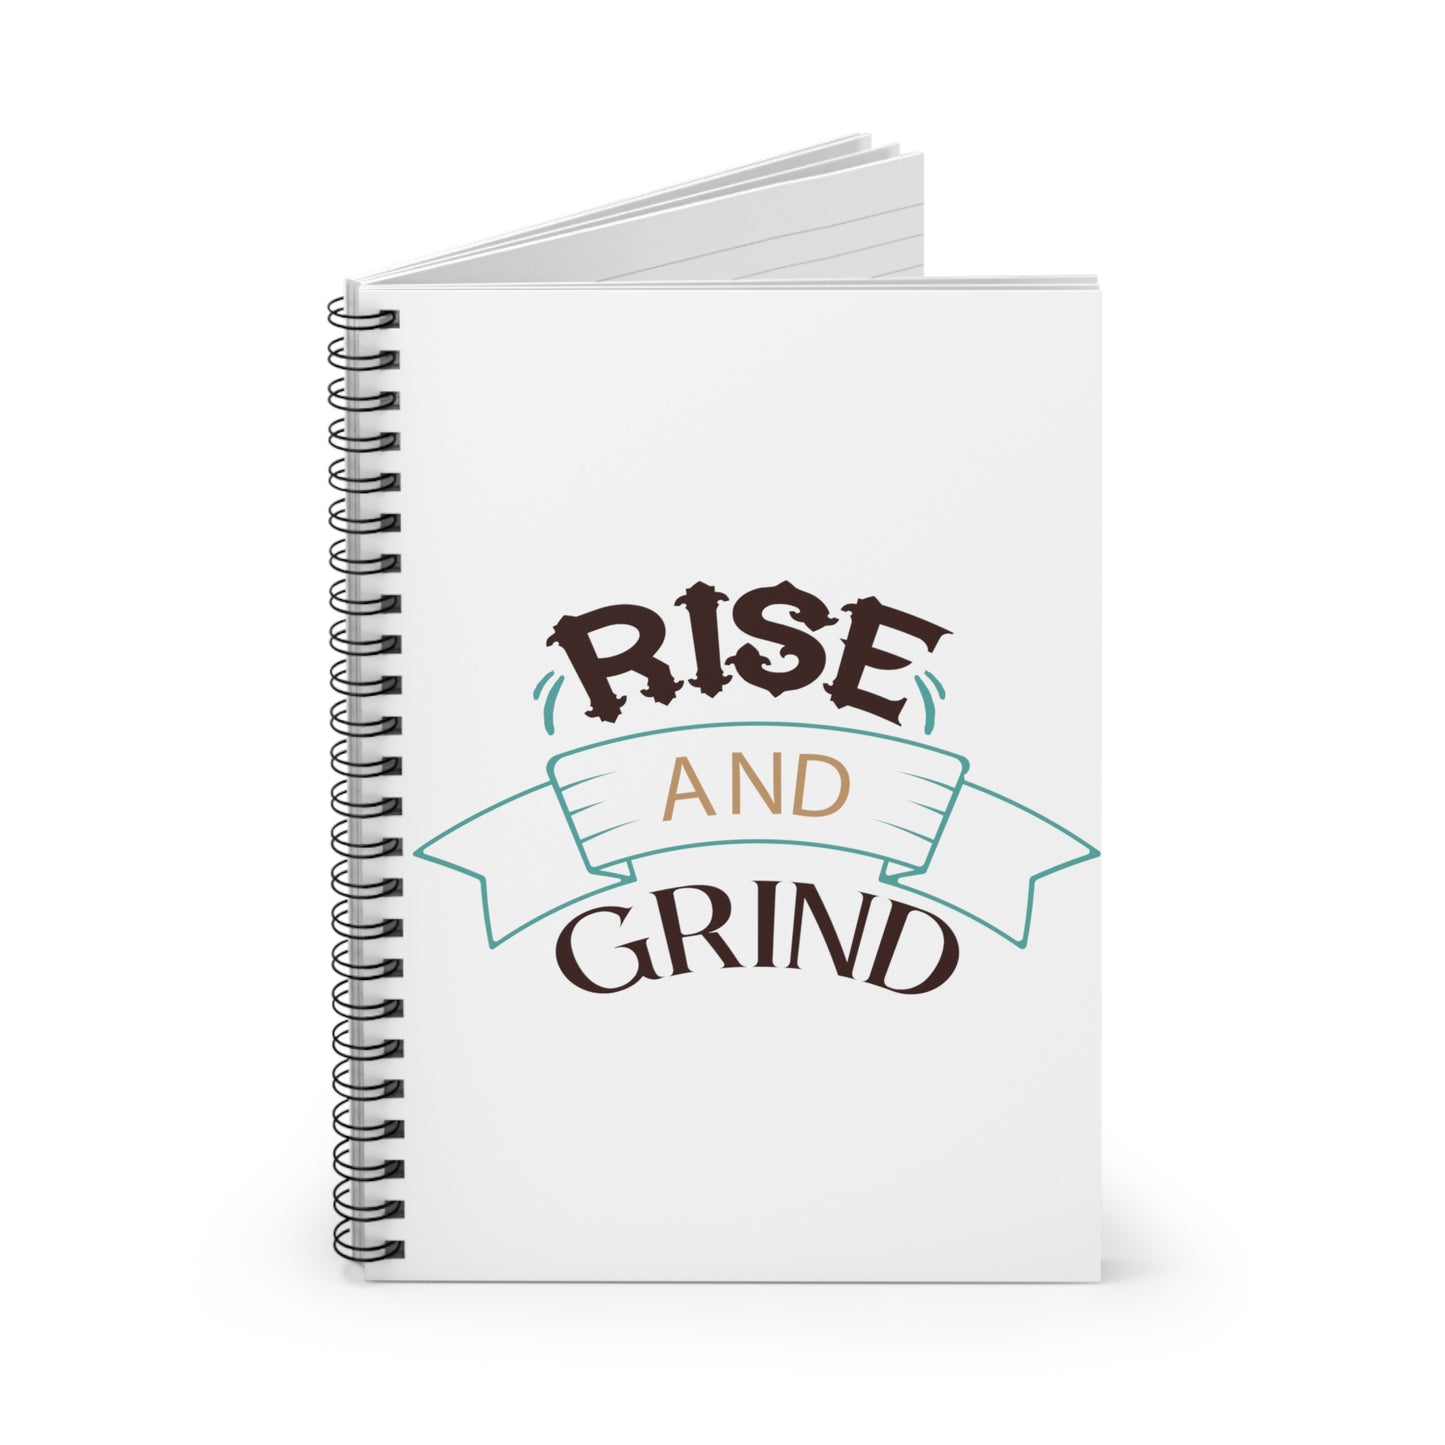 Rise and Grind: Spiral Notebook - Log Books - Journals - Diaries - and More Custom Printed by TheGlassyLass